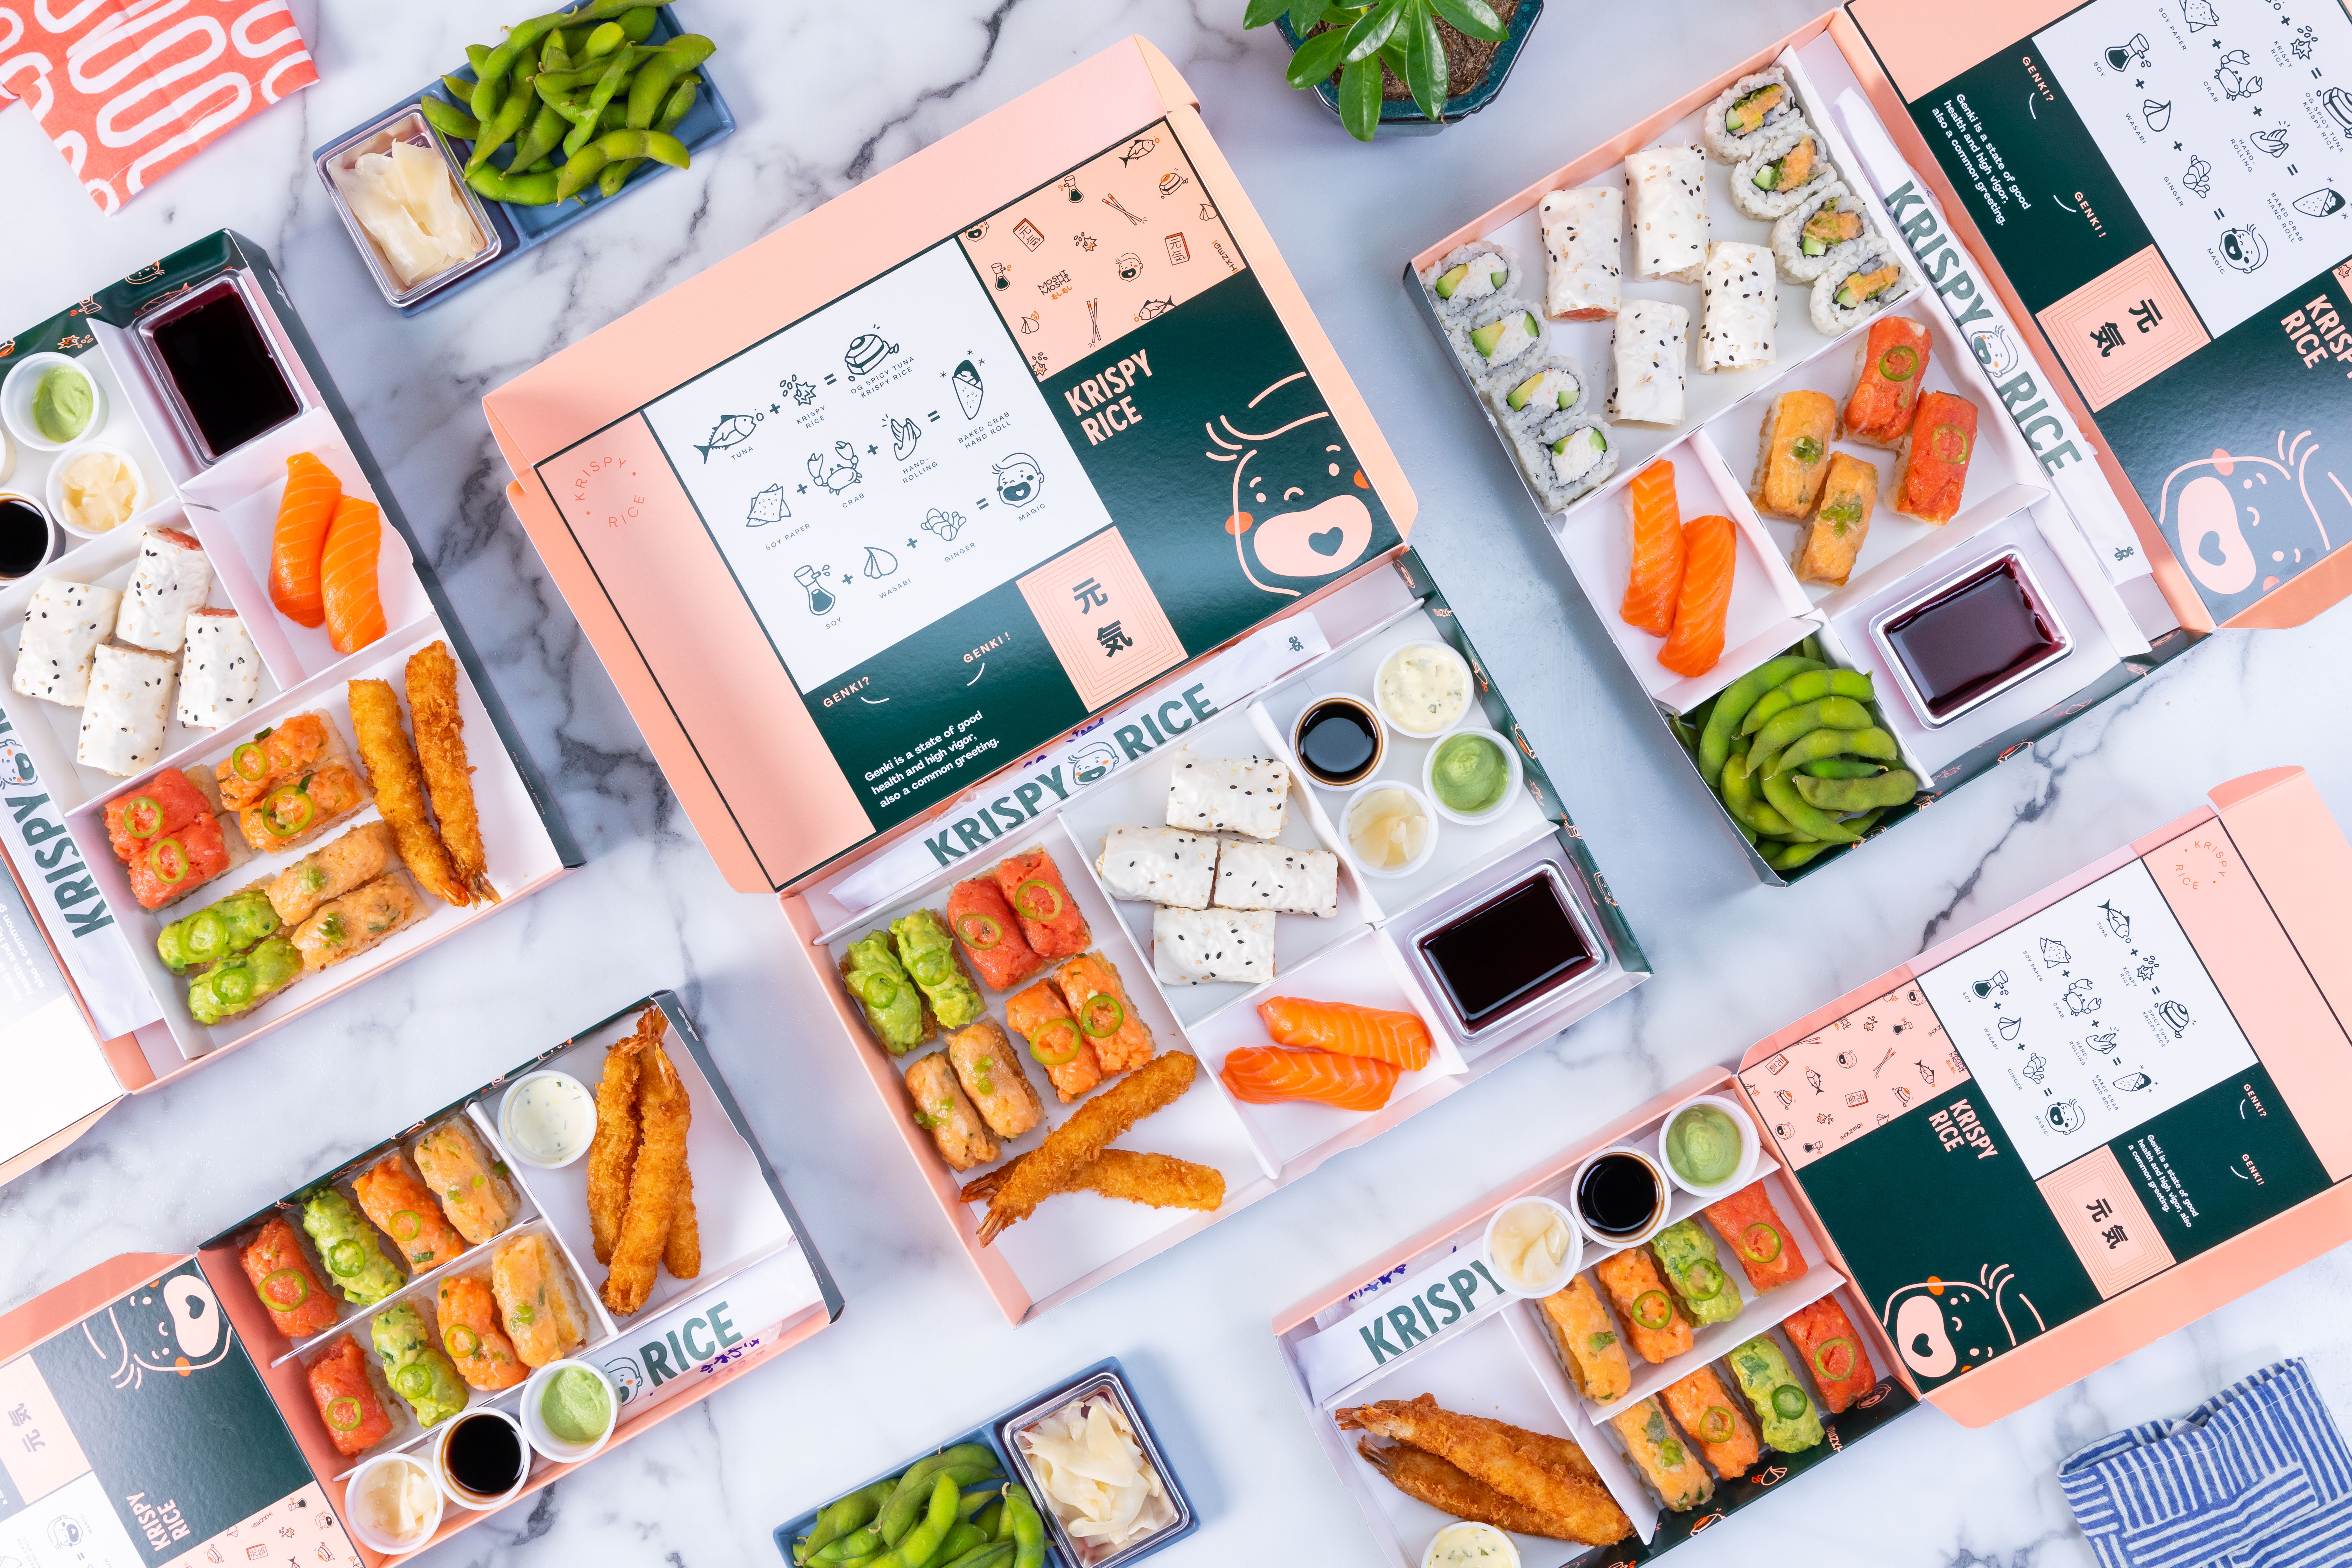 A selection of pink and turquoise sushi bento boxes from Krispy Rice, one of 13 restaurant stalls opening at the Citizens Market food hall at Phipps Plaza in Atlanta. 